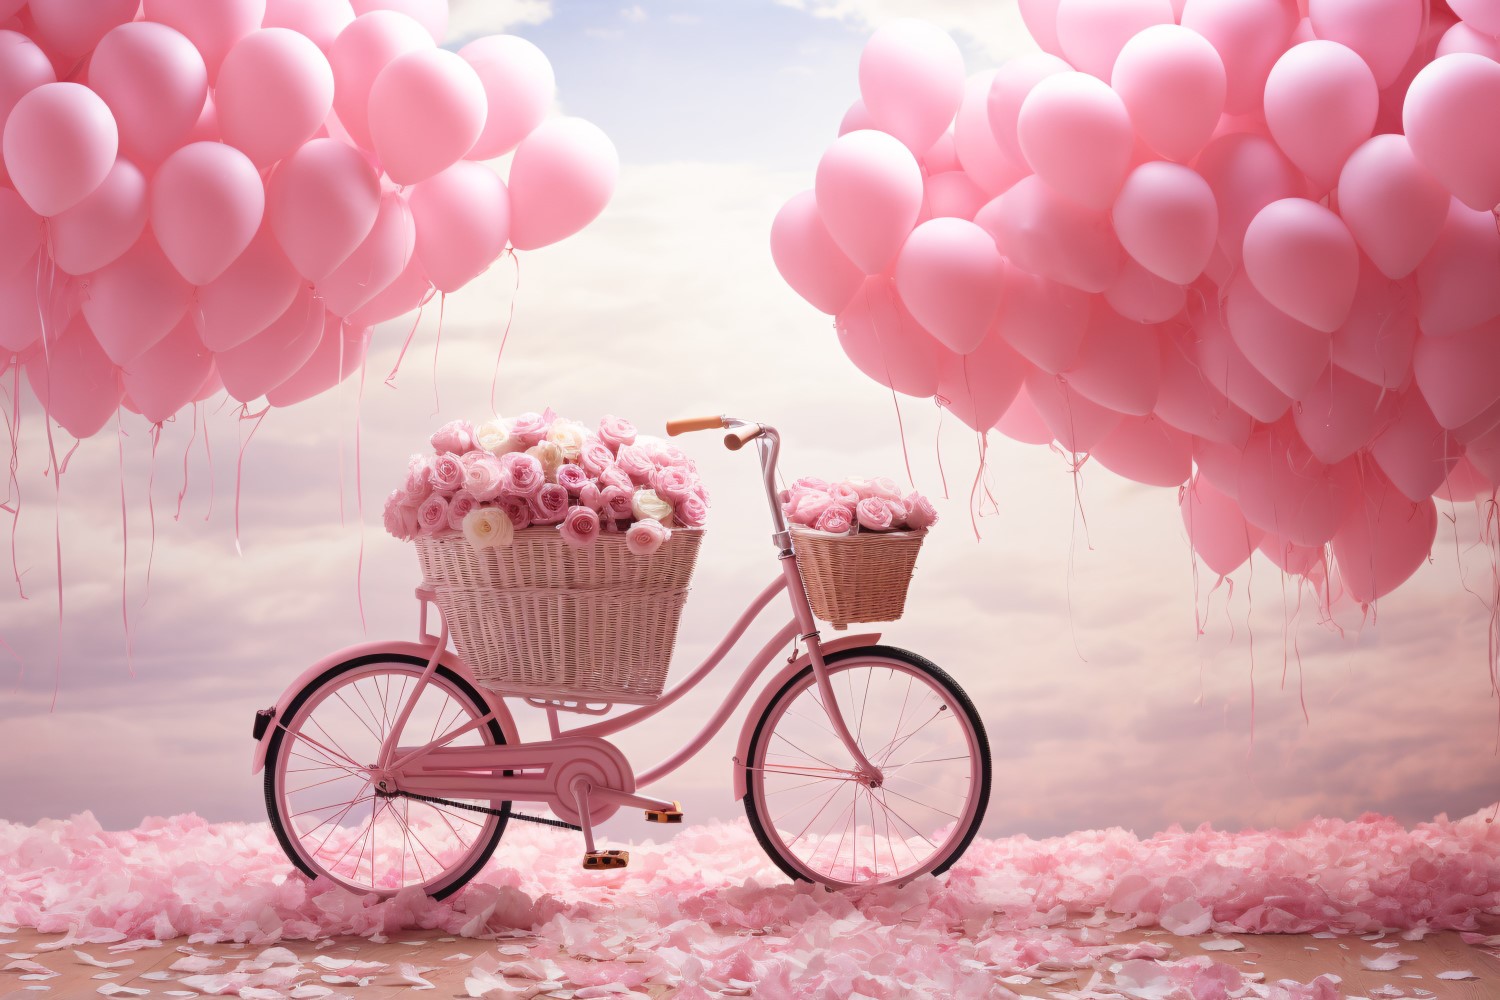 Cycle with Pink Balloon Decorated for Valentine day 02